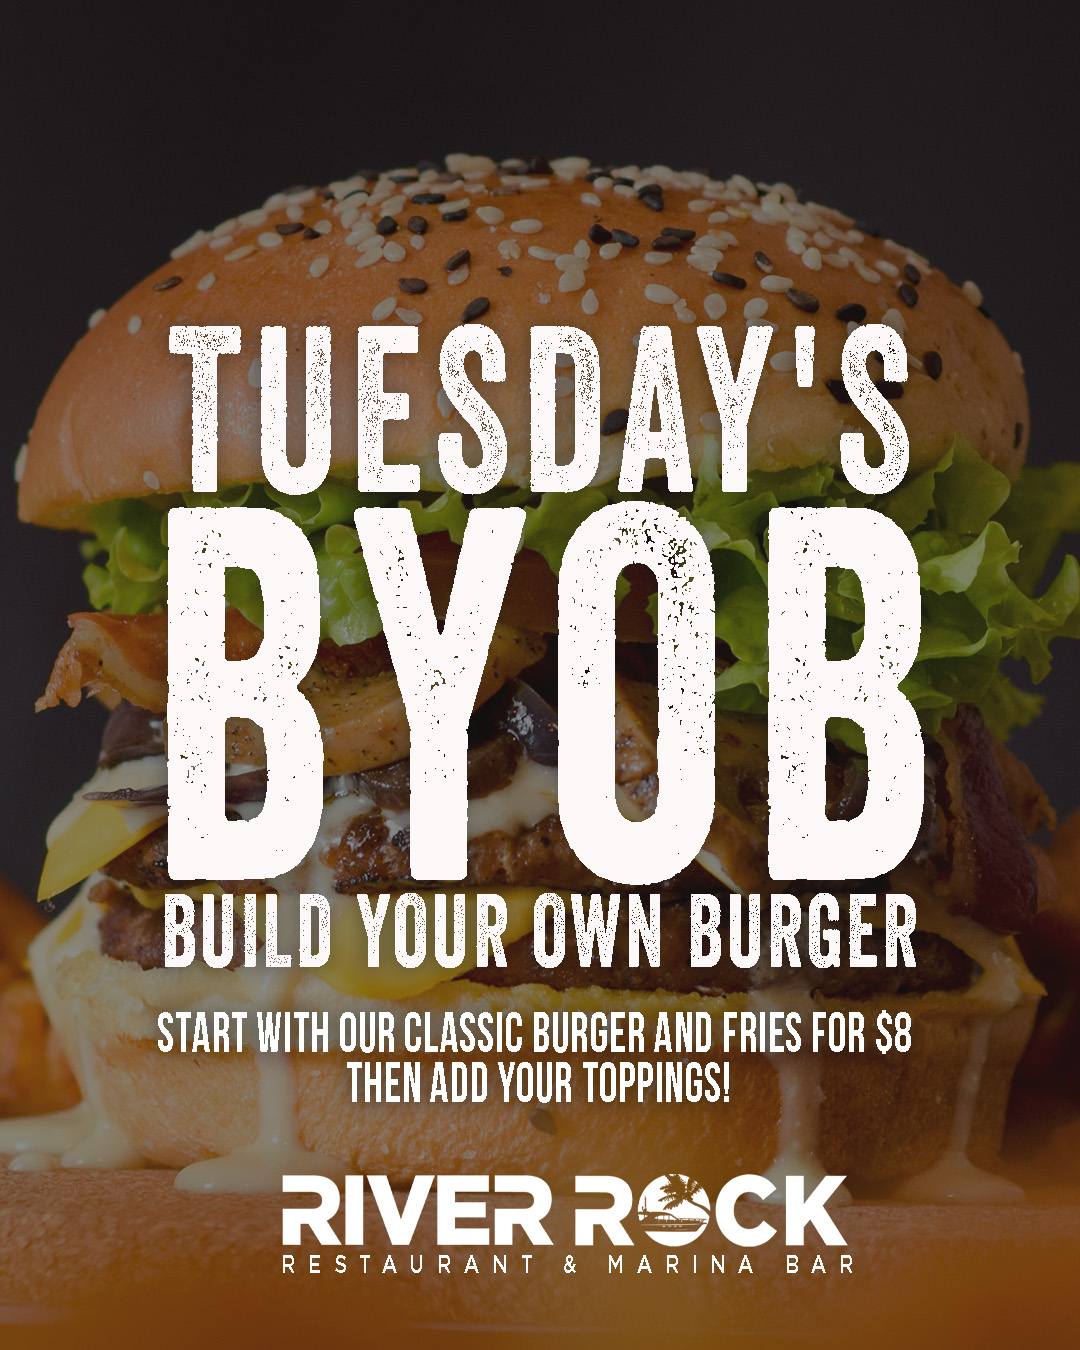 BUILD YOUR OWN BURGER